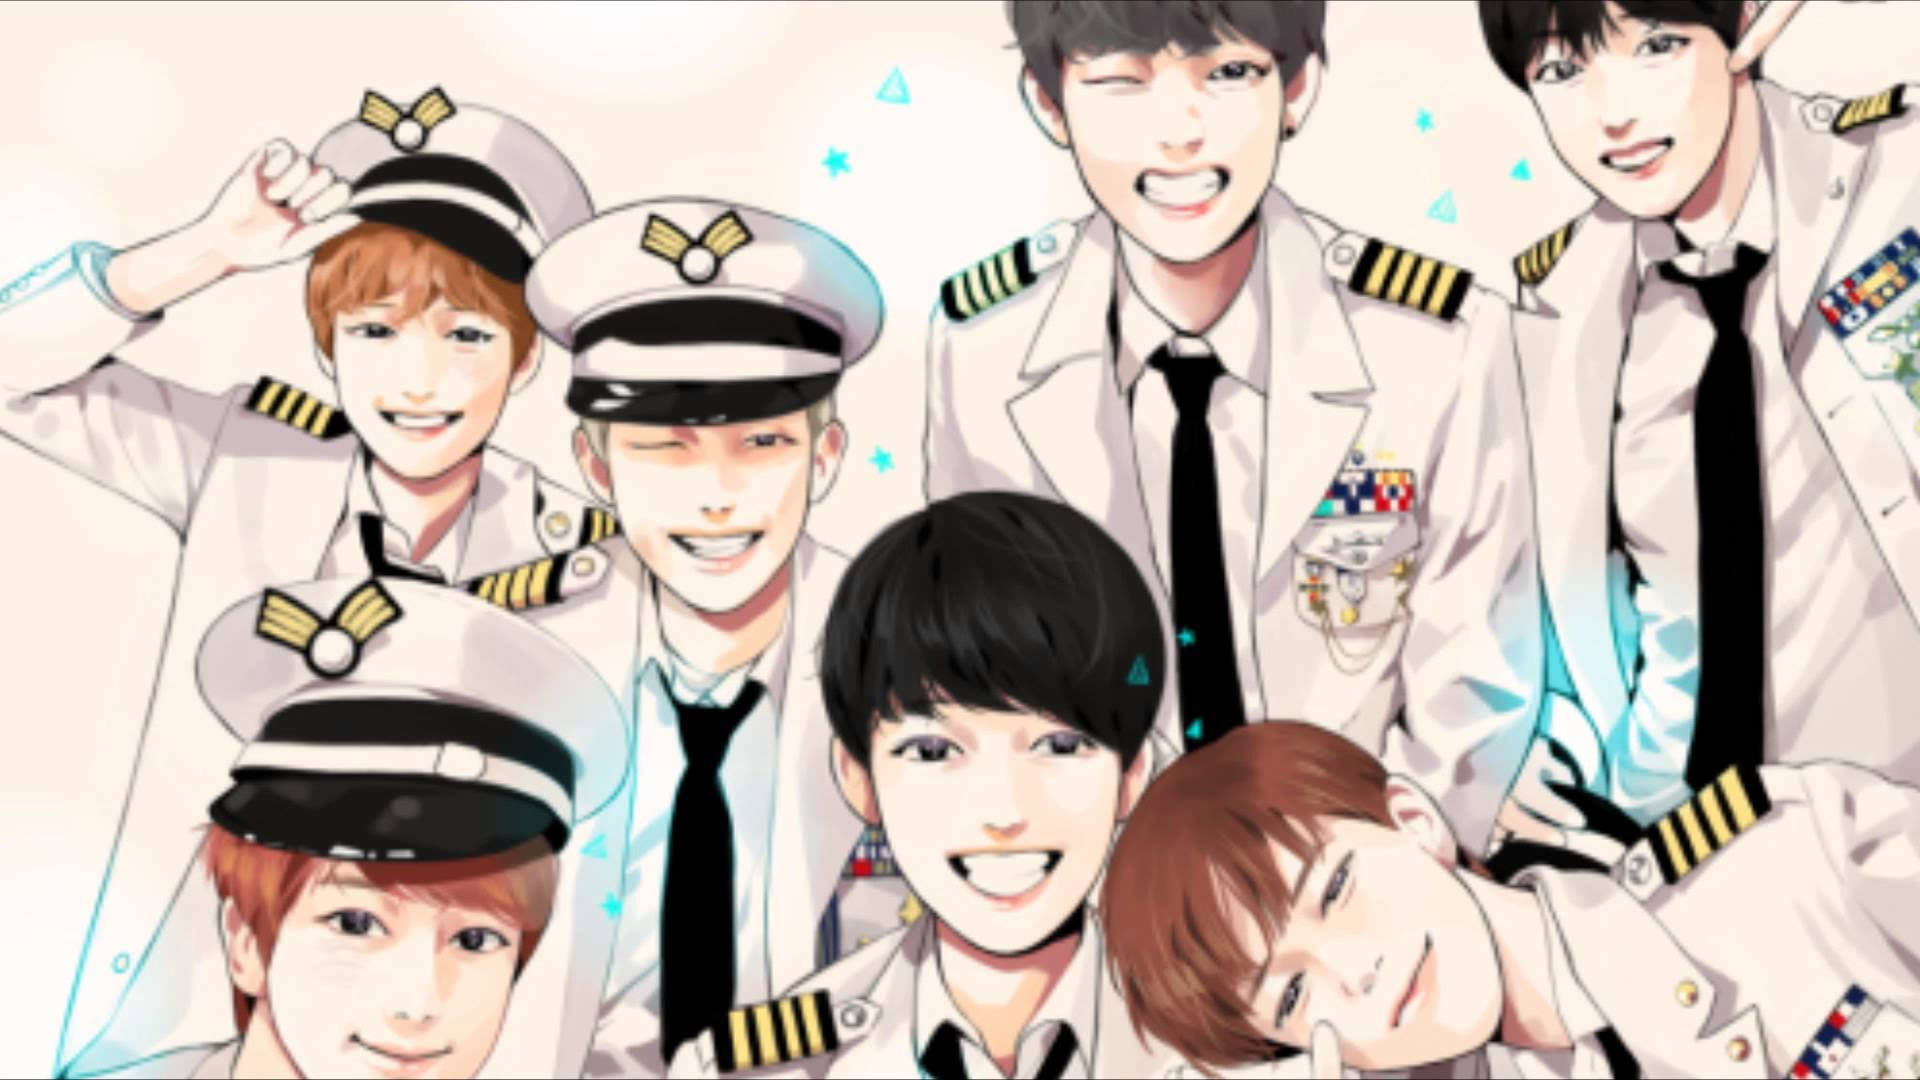 Free Bts Anime Wallpaper Downloads, [100+] Bts Anime Wallpapers for FREE |  